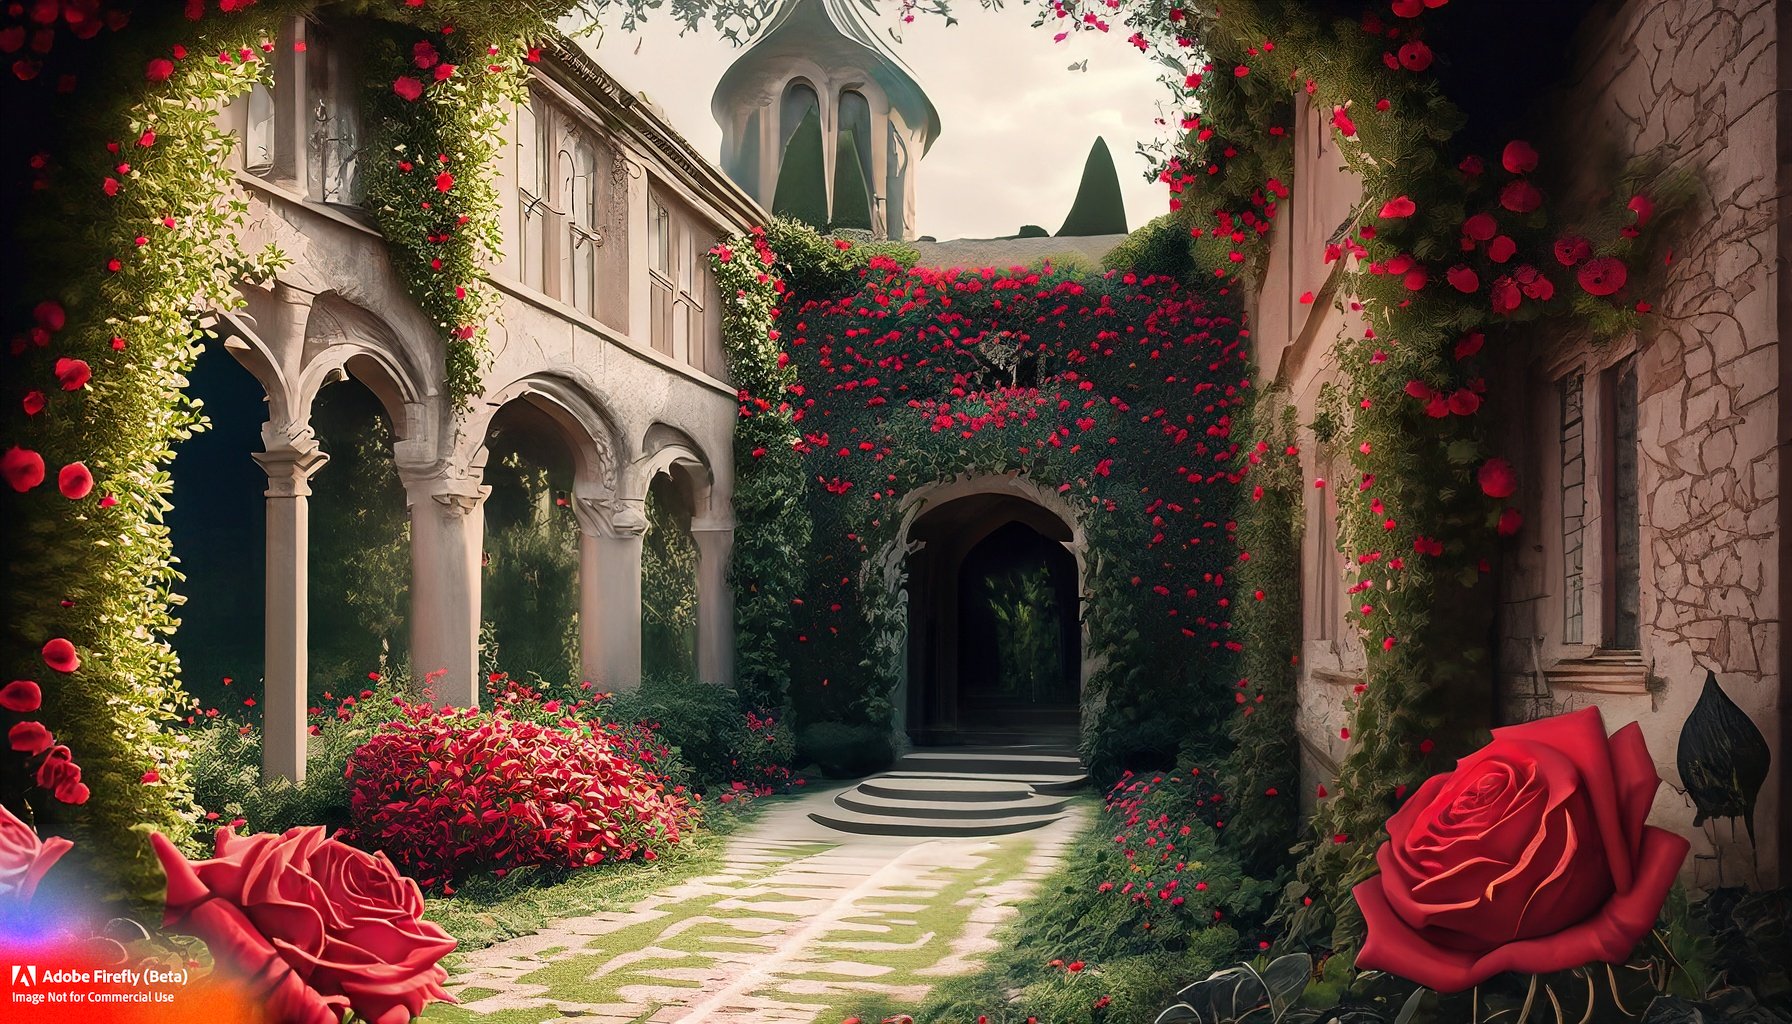 Firefly_a+court of thorns and roses, red roses, mansion with vines, garden courtyard, fairytale vibes_photo_74400.jpg